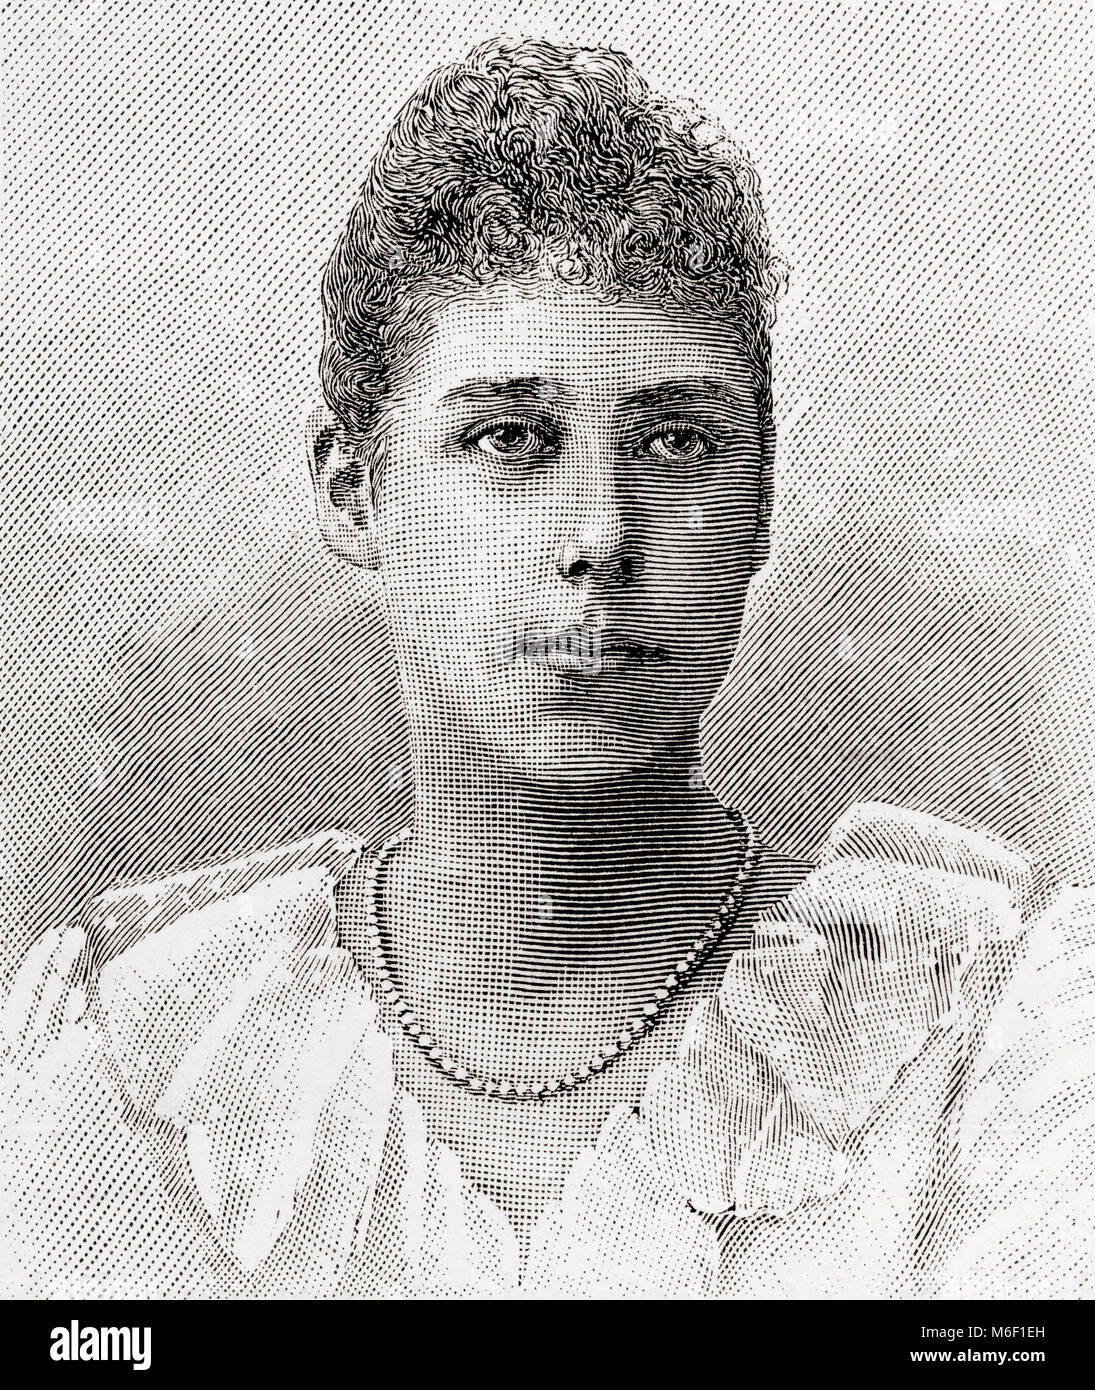 Princess Victoria Melita of Saxe-Coburg and Gotha and Edinburgh, later Grand Duchess Victoria Feodorovna of Russia, 1876 – 1936. A granddaughter of Queen Victoria of the United Kingdom and Emperor Alexander II of Russia.  From The Strand Magazine, published January to June, 1894. Stock Photo